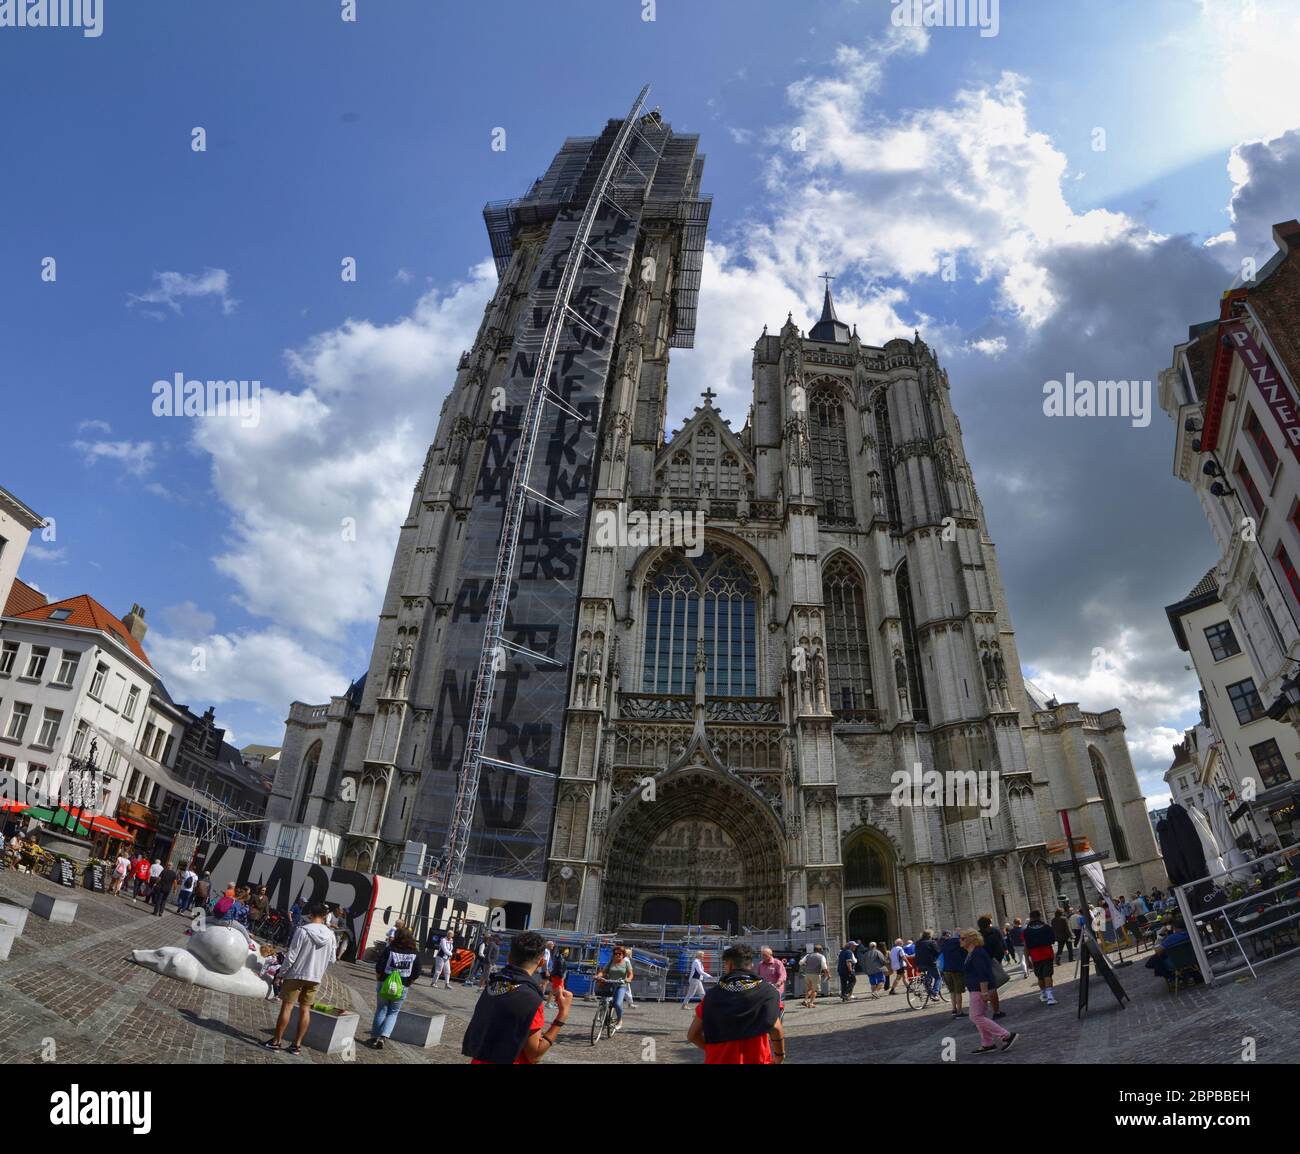 Antwerp, Flanders, Belgium. August 2019. View of the imposing entrance facade of the cathedral. You can see the scaffolding on the bell tower, many pe Stock Photo